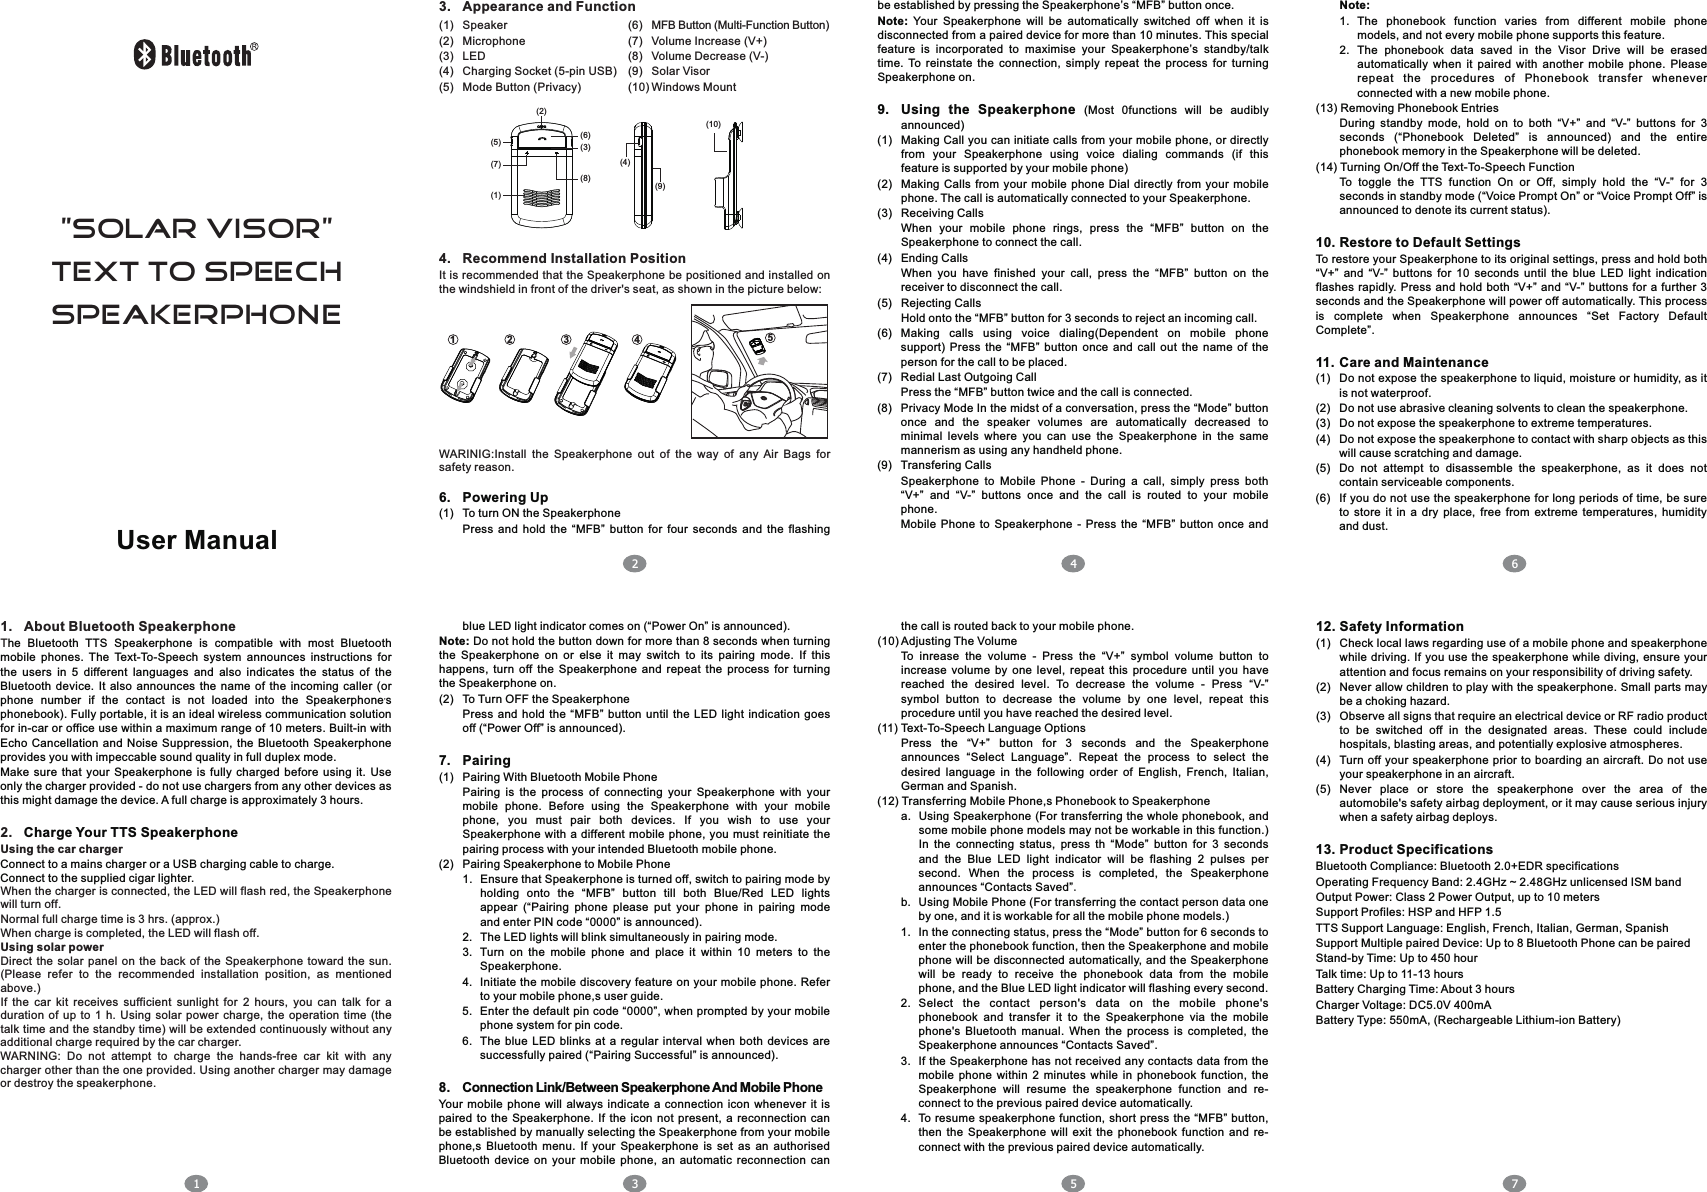 User Manual1. About Bluetooth SpeakerphoneT2.Using the car chargerWhen the charger is connected, the LED will flash red, the Speakerphone will turn off.Normal full charge time is 3 hrs. (approx.)When charge is completed, the LED will flash off.Using solar powerDirect  the solar  panel on the  back  of the  Speakerphone toward the  sun. (Please  refer  to  the  recommended  installation  position,  as  mentioned above.)If  the  car  kit  receives  sufficient  sunlight  for  2  hours,  you  can  talk  for  a duration  of  up to  1  h.  Using  solar power  charge,  the  operation  time (the talk time and the standby time) will be extended continuously without any additional charge required by the car charger.WARNING:  Do  not  attempt  to  charge  the  hands-free  car  kit  with  any charger other than the one provided. Using another charger may damage or destroy the speakerphone.he  Bluetooth  TTS  Speakerphone  is  compatible  with  most  Bluetooth mobile  phones.  The  Text-To-Speech  system  announces  instructions  for the  users  in  5  different  languages  and  also  indicates  the  status  of  the Bluetooth  device.  It  also announces  the  name  of  the  incoming  caller  (or ,phone  number  if  the  contact  is  not  loaded  into  the  Speakerphone s phonebook). Fully portable, it is an ideal wireless communication solution for in-car or office use within a maximum range of 10 meters. Built-in with Echo  Cancellation and  Noise  Suppression, the  Bluetooth  Speakerphone provides you with impeccable sound quality in full duplex mode.Make  sure  that  your  Speakerphone  is  fully  charged before using  it.  Use only the charger provided - do not use chargers from any other devices as this might damage the device. A full charge is approximately 3 hours.Charge Your TTS SpeakerphoneConnect to a mains charger or a USB charging cable to charge.Connect to the supplied cigar lighter.123. Appearance and Function be established by pressing the Speakerphone’s “MFB” button once.Note:  Your  Speakerphone  will  be  automatically  switched  off  when  it  is disconnected from a paired device for more than 10 minutes. This special feature  is  incorporated  to  maximise  your  Speakerphone’s  standby/talk time.  To  reinstate  the  connection,  simply  repeat  the  process  for  turning Speakerphone on.9. Using  the  Speakerphone  (Most  0functions  will  be  audibly announced)(1) Making Call you can initiate calls from your mobile phone, or directly from  your  Speakerphone  using  voice  dialing  commands  (if  this feature is supported by your mobile phone)(2) Making  Calls from your mobile phone  Dial  directly  from  your mobile phone. The call is automatically connected to your Speakerphone.(3) Receiving CallsWhen  your  mobile  phone  rings,  press  the  “MFB”  button  on  the Speakerphone to connect the call.(4) Ending CallsWhen  you  have  finished  your  call,  press  the  “MFB”  button  on  the receiver to disconnect the call.(5) Rejecting CallsHold onto the “MFB” button for 3 seconds to reject an incoming call.(6) Making  calls  using  voice  dialing(Dependent  on  mobile  phone support)  Press  the  “MFB”  button  once  and  call  out  the  name  of  the person for the call to be placed.(7) Redial Last Outgoing CallPress the “MFB” button twice and the call is connected.(8) Privacy Mode In the midst of a conversation, press the “Mode” button once  and  the  speaker  volumes  are  automatically  decreased  to minimal  levels  where  you  can  use  the  Speakerphone  in  the  same mannerism as using any handheld phone.(9) Transfering CallsSpeakerphone  to  Mobile  Phone  -  During  a  call,  simply  press  both “V+”  and  “V-”  buttons  once  and  the  call  is  routed  to  your  mobile phone.Mobile  Phone  to  Speakerphone  -  Press  the  “MFB”  button  once  and blue LED light indicator comes on (“Power On” is announced).Note: Do not hold the button down for more than 8 seconds when turning the  Speakerphone  on  or  else  it  may  switch  to  its  pairing  mode.  If  this happens,  turn  off  the  Speakerphone  and  repeat  the  process  for  turning the Speakerphone on.(2) To Turn OFF the SpeakerphonePress and  hold the  “MFB”  button  until  the  LED  light indication  goes off (“Power Off” is announced).7. Pairing(1) Pairing With Bluetooth Mobile PhonePairing  is  the  process  of  connecting  your  Speakerphone  with  your mobile  phone.  Before  using  the  Speakerphone  with  your  mobile phone,  you  must  pair  both  devices.  If  you  wish  to  use  your Speakerphone  with  a different mobile  phone,  you must  reinitiate the pairing process with your intended Bluetooth mobile phone.(2) Pairing Speakerphone to Mobile Phone1. Ensure that Speakerphone is turned off, switch to pairing mode by holding  onto  the  “MFB”  button  till  both  Blue/Red  LED  lights appear  (“Pairing  phone  please  put  your  phone  in  pairing  mode and enter PIN code “0000” is announced).2. The LED lights will blink simultaneously in pairing mode.3. Turn  on  the  mobile  phone  and  place  it  within  10  meters  to  the Speakerphone.4. Initiate the mobile discovery feature on your mobile phone. Refer to your mobile phone,s user guide.5. Enter the default pin code “0000”, when prompted by your mobile phone system for pin code.6. The blue  LED  blinks  at a  regular  interval  when  both  devices  are successfully paired (“Pairing Successful” is announced).8. Connection Link/Between Speakerphone And Mobile PhoneYour  mobile  phone  will always  indicate  a  connection  icon  whenever  it  is paired  to  the  Speakerphone.  If the  icon not  present,  a  reconnection  can be established by manually selecting the Speakerphone from your mobile phone,s  Bluetooth  menu.  If  your  Speakerphone  is  set  as  an  authorised Bluetooth  device  on  your  mobile  phone,  an  automatic  reconnection  can the call is routed back to your mobile phone.(10) Adjusting The VolumeTo  inrease  the  volume  -  Press  the  “V+”  symbol  volume  button  to increase  volume  by  one  level,  repeat  this  procedure  until  you  have reached  the  desired  level.  To  decrease  the  volume  -  Press  “V-” symbol  button  to  decrease  the  volume  by  one  level,  repeat  this procedure until you have reached the desired level.(11) Text-To-Speech Language OptionsPress  the  “V+”  button  for  3  seconds  and  the  Speakerphone announces  “Select  Language”.  Repeat  the  process  to  select  the desired  language  in  the  following  order  of  English,  French,  Italian, German and Spanish.(12) Transferring Mobile Phone,s Phonebook to Speakerphonea. Using Speakerphone (For transferring the whole phonebook, and some mobile phone models may not be workable in this function.) In  the  connecting  status,  press  th  “Mode”  button  for  3  seconds and  the  Blue  LED  light  indicator  will  be  flashing  2  pulses  per second.  When  the  process  is  completed,  the  Speakerphone announces “Contacts Saved”.b. Using Mobile Phone (For transferring the contact person data one by one, and it is workable for all the mobile phone models.)1. In the connecting status, press the “Mode” button for 6 seconds to enter the phonebook function, then the Speakerphone and mobile phone will be disconnected automatically, and the Speakerphone will  be  ready  to  receive  the  phonebook  data  from  the  mobile phone, and the Blue LED light indicator will flashing every second.2. Select  the  contact  person&apos;s  data  on  the  mobile  phone&apos;s phonebook  and  transfer  it  to  the  Speakerphone  via  the  mobile phone&apos;s  Bluetooth  manual.  When  the  process  is  completed,  the Speakerphone announces “Contacts Saved”.3. If the Speakerphone has not received any contacts data from the mobile  phone  within  2 minutes  while  in  phonebook  function,  the Speakerphone  will  resume  the  speakerphone  function  and  re-connect to the previous paired device automatically.4. To resume  speakerphone function, short  press the “MFB” button, then  the  Speakerphone  will  exit  the  phonebook  function  and  re-connect with the previous paired device automatically.Note:1. The  phonebook  function  varies  from  different  mobile  phone models, and not every mobile phone supports this feature.2. The  phonebook  data  saved  in  the  Visor  Drive  will  be  erased automatically  when  it  paired  with  another  mobile  phone.  Please repeat  the  procedures  of  Phonebook  transfer  whenever connected with a new mobile phone.(13) Removing Phonebook EntriesDuring  standby  mode,  hold  on  to  both  “V+”  and  “V-”  buttons  for  3 seconds  (“Phonebook  Deleted”  is  announced)  and  the  entire phonebook memory in the Speakerphone will be deleted.(14) Turning On/Off the Text-To-Speech FunctionTo  toggle  the  TTS  function  On  or  Off,  simply  hold  the  “V-”  for  3 seconds in standby mode (“Voice Prompt On” or “Voice Prompt Off” is announced to denote its current status).10. Restore to Default SettingsTo restore your Speakerphone to its original settings, press and hold both “V+”  and  “V-”  buttons  for  10  seconds  until  the  blue  LED  light  indication flashes  rapidly.  Press and hold both  “V+”  and “V-” buttons for a further  3 seconds and the Speakerphone will power off automatically. This process is  complete  when  Speakerphone  announces  “Set  Factory  Default Complete”.11. Care and Maintenance(1) Do not expose the speakerphone to liquid, moisture or humidity, as it is not waterproof.(2) Do not use abrasive cleaning solvents to clean the speakerphone.(3) Do not expose the speakerphone to extreme temperatures.(4) Do not expose the speakerphone to contact with sharp objects as this will cause scratching and damage.(5) Do  not  attempt  to  disassemble  the  speakerphone,  as  it  does  not contain serviceable components.(6) If you do not use the speakerphone for long periods of time, be sure to  store  it  in  a  dry  place,  free  from  extreme  temperatures,  humidity and dust.12. Safety Information(1) Check local laws regarding use of a mobile phone and speakerphone while driving. If  you use the speakerphone while diving, ensure your attention and focus remains on your responsibility of driving safety.(2) Never allow children to play with the speakerphone. Small parts may be a choking hazard.(3) Observe all signs that require an electrical device or RF radio product to  be  switched  off  in  the  designated  areas.  These  could  include hospitals, blasting areas, and potentially explosive atmospheres.(4) Turn off  your speakerphone prior to boarding an aircraft.  Do  not use your speakerphone in an aircraft.(5) Never  place  or  store  the  speakerphone  over  the  area  of  the automobile&apos;s safety airbag deployment, or it may cause serious injury when a safety airbag deploys.13. Product SpecificationsBluetooth Compliance: Bluetooth 2.0+EDR specificationsOperating Frequency Band: 2.4GHz ~ 2.48GHz unlicensed ISM bandOutput Power: Class 2 Power Output, up to 10 metersSupport Profiles: HSP and HFP 1.5TTS Support Language: English, French, Italian, German, SpanishSupport Multiple paired Device: Up to 8 Bluetooth Phone can be pairedStand-by Time: Up to 450 hourTalk time: Up to 11-13 hoursBattery Charging Time: About 3 hoursCharger Voltage: DC5.0V 400mABattery Type: 550mA, (Rechargeable Lithium-ion Battery)34567(1) Speaker (6) MFB Button (Multi-Function Button)(2) Microphone (7) Volume Increase (V+)(3) LED (8) Volume Decrease (V-)(4) Charging Socket (5-pin USB) (9) Solar Visor(5) Mode Button (Privacy) (10) Windows Mount&quot;SOLAR VISOR&quot;text to speecHSPEAKERPHONE(10)(1)(2)(3)(6)(8)(7)(5)(4)(9)WARINIG:Install  the  Speakerphone  out  of  the  way  of  any  Air  Bags  for safety reason.6. Powering Up(1) To turn ON the SpeakerphonePress  and  hold  the  “MFB”  button  for  four  seconds  and  the  flashing 1 2 3 4 54. Recommend Installation PositionIt is recommended that the Speakerphone be positioned and installed on the windshield in front of the driver&apos;s seat, as shown in the picture below: